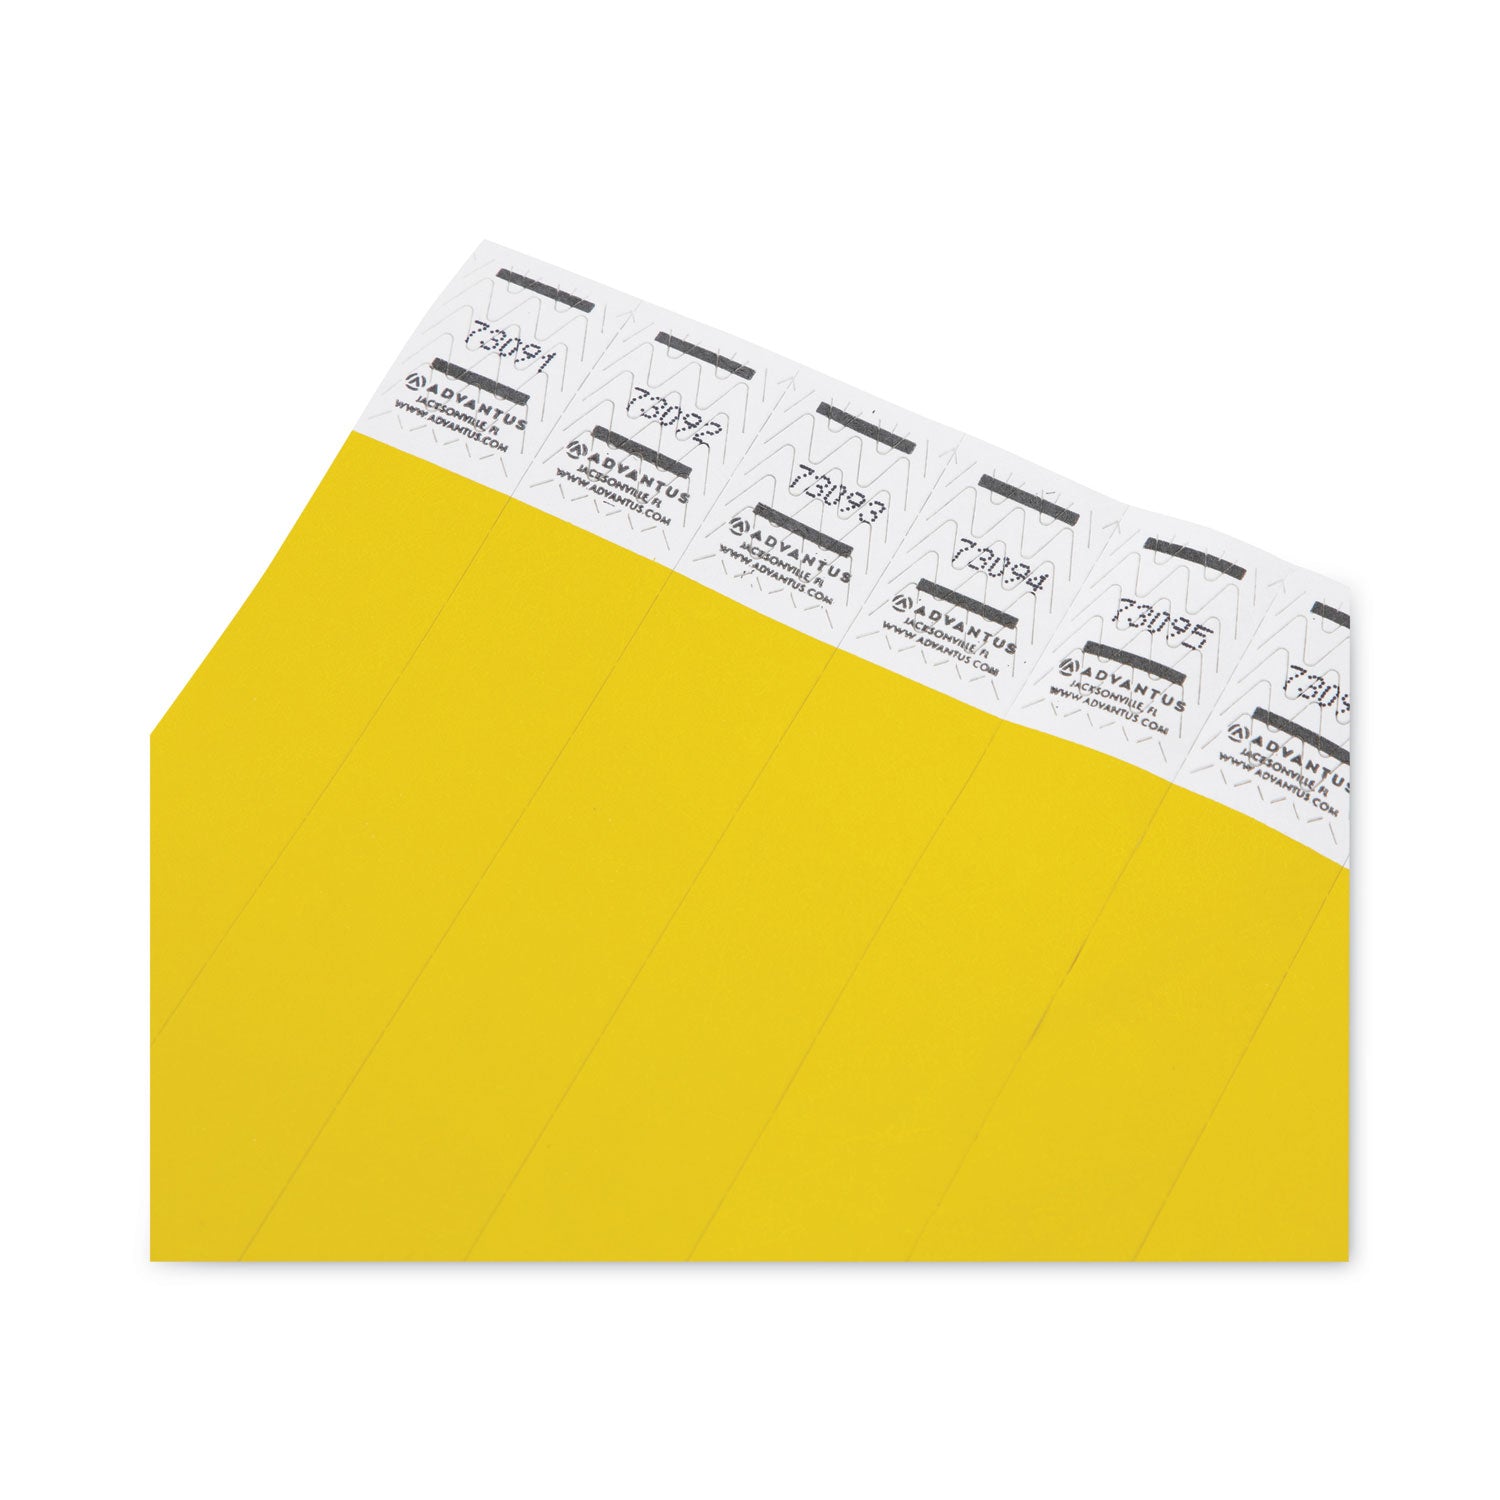 crowd-management-wristbands-sequentially-numbered-975-x-075-neon-yellow500-pack_avt91123 - 4